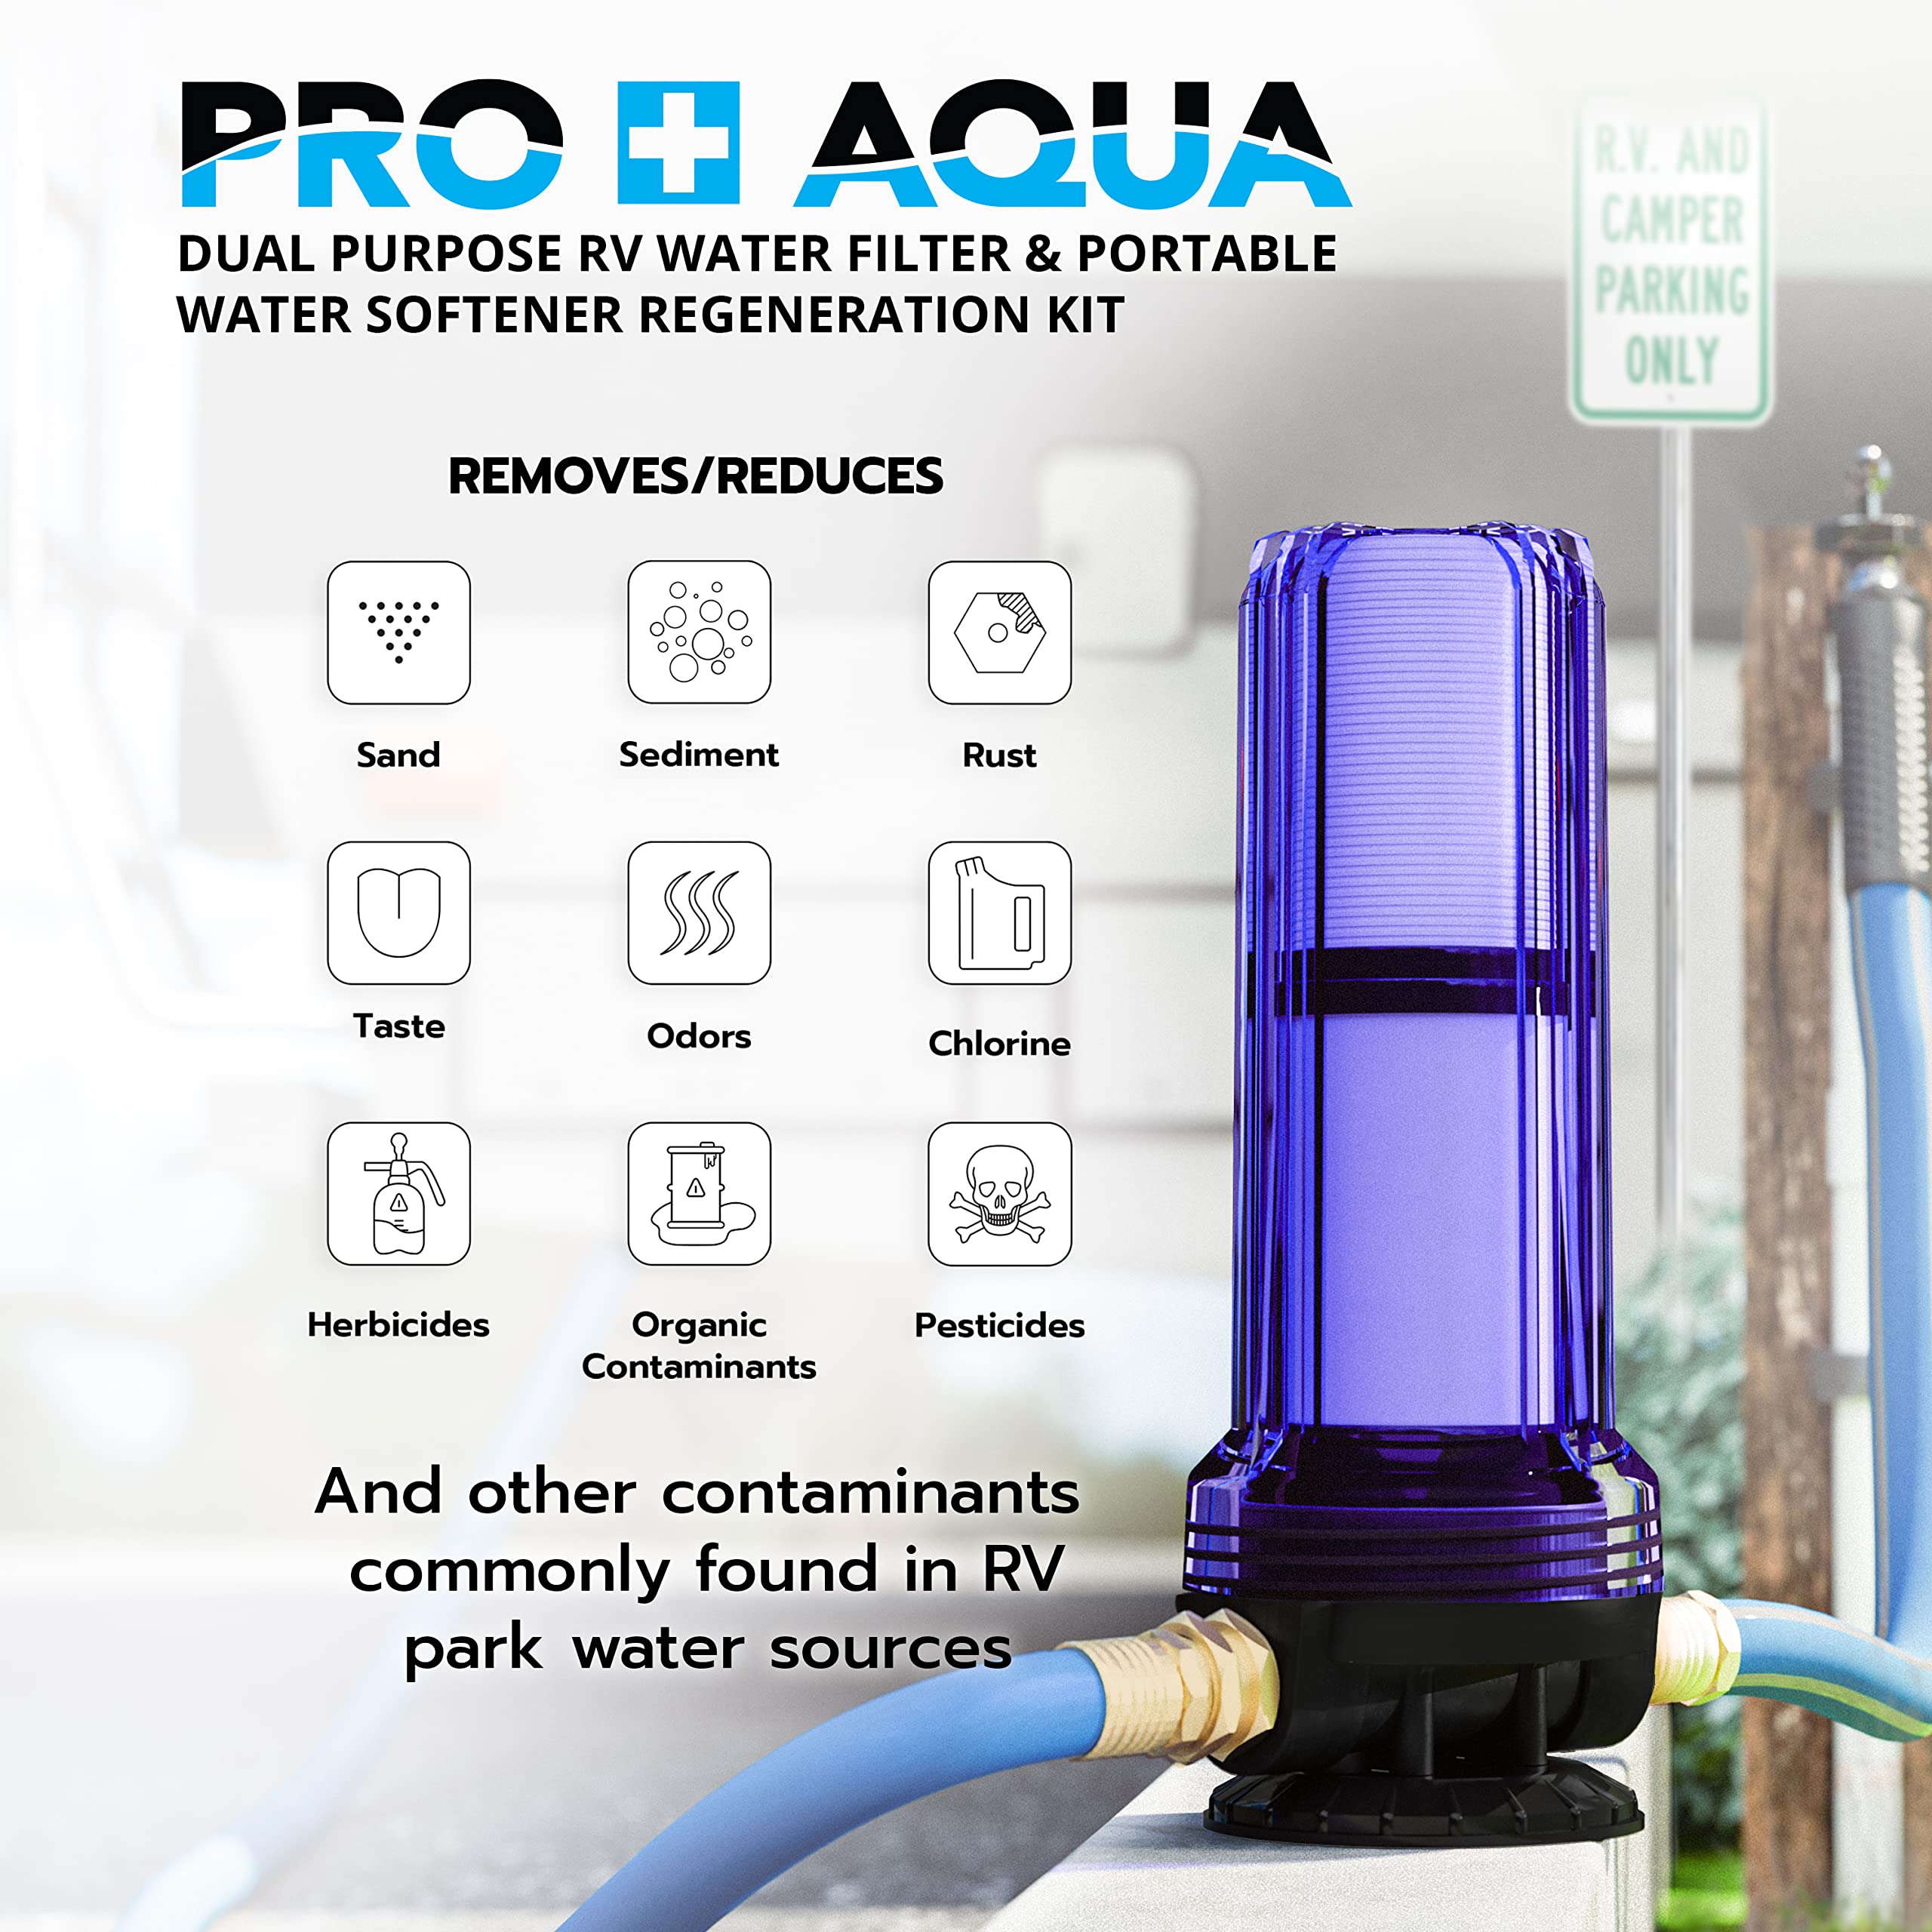 PRO+AQUA RV Water Filter and Portable Water Softener Regeneration Kit - 5 Micron Filtration, Anti-Corrosion Brass Fittings, Transparent Housing, Filters Chlorine, Bad Taste, Odors, Sediment, Bacteria